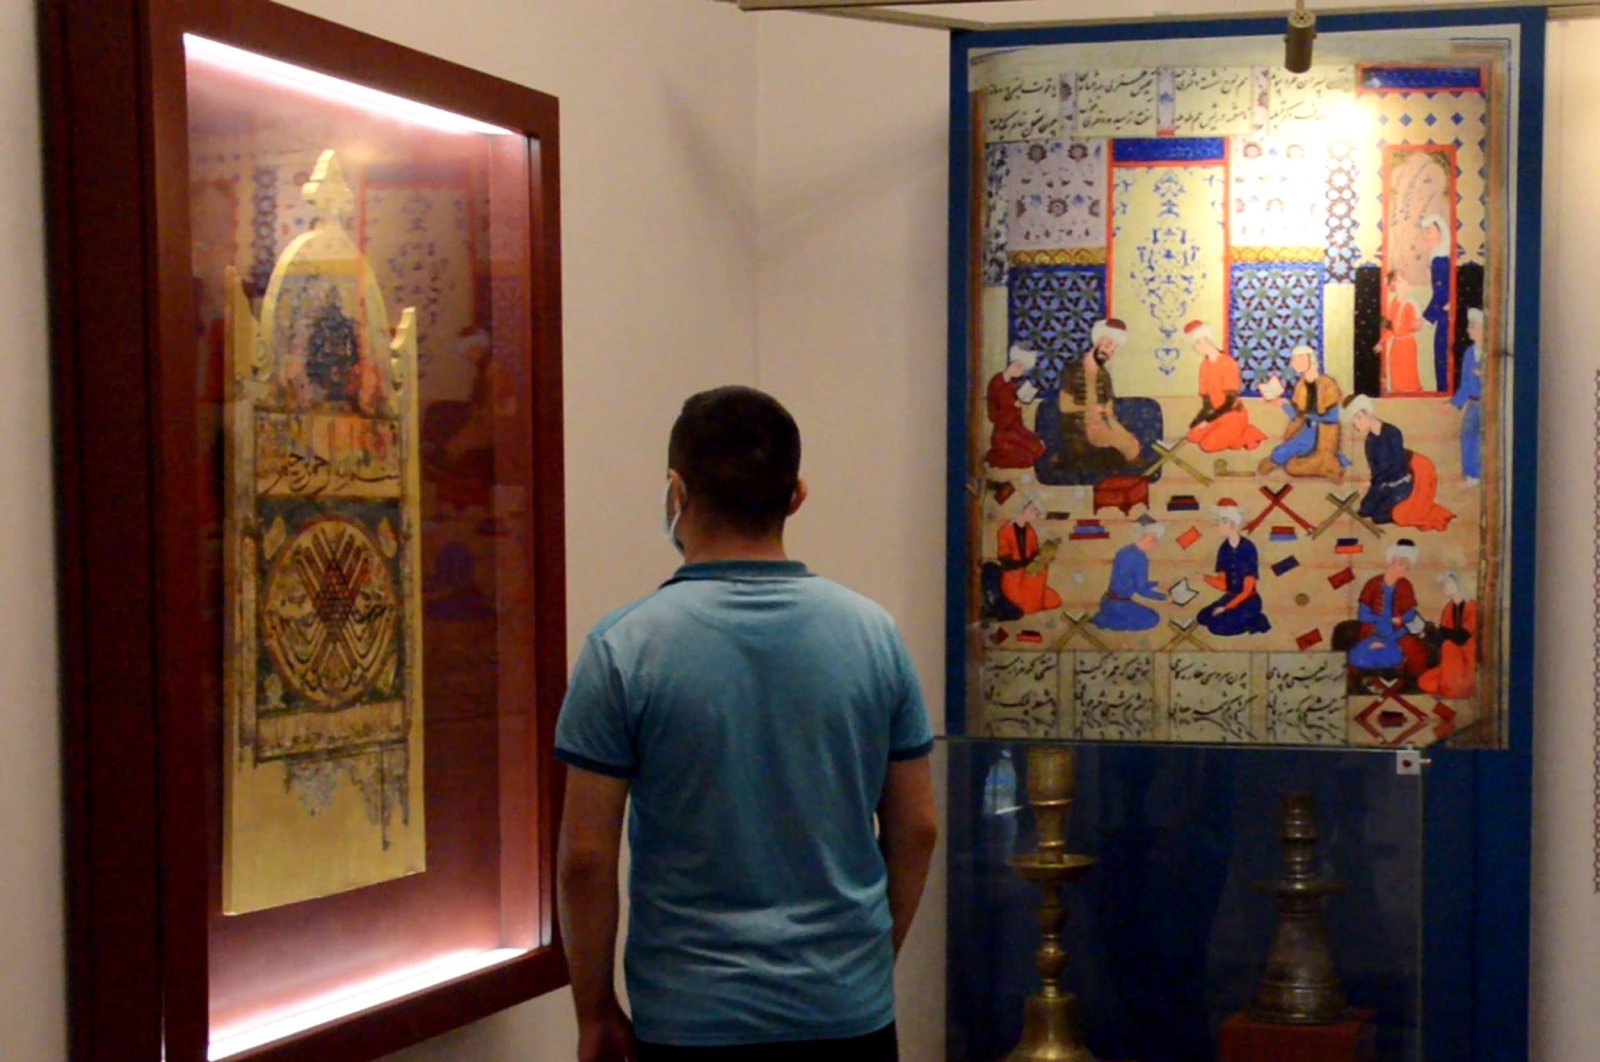 A visitor examines works in the Çifte Minareli Medrese, Erzurum, eastern Turkey, July 15, 2021. (DHA Photo)